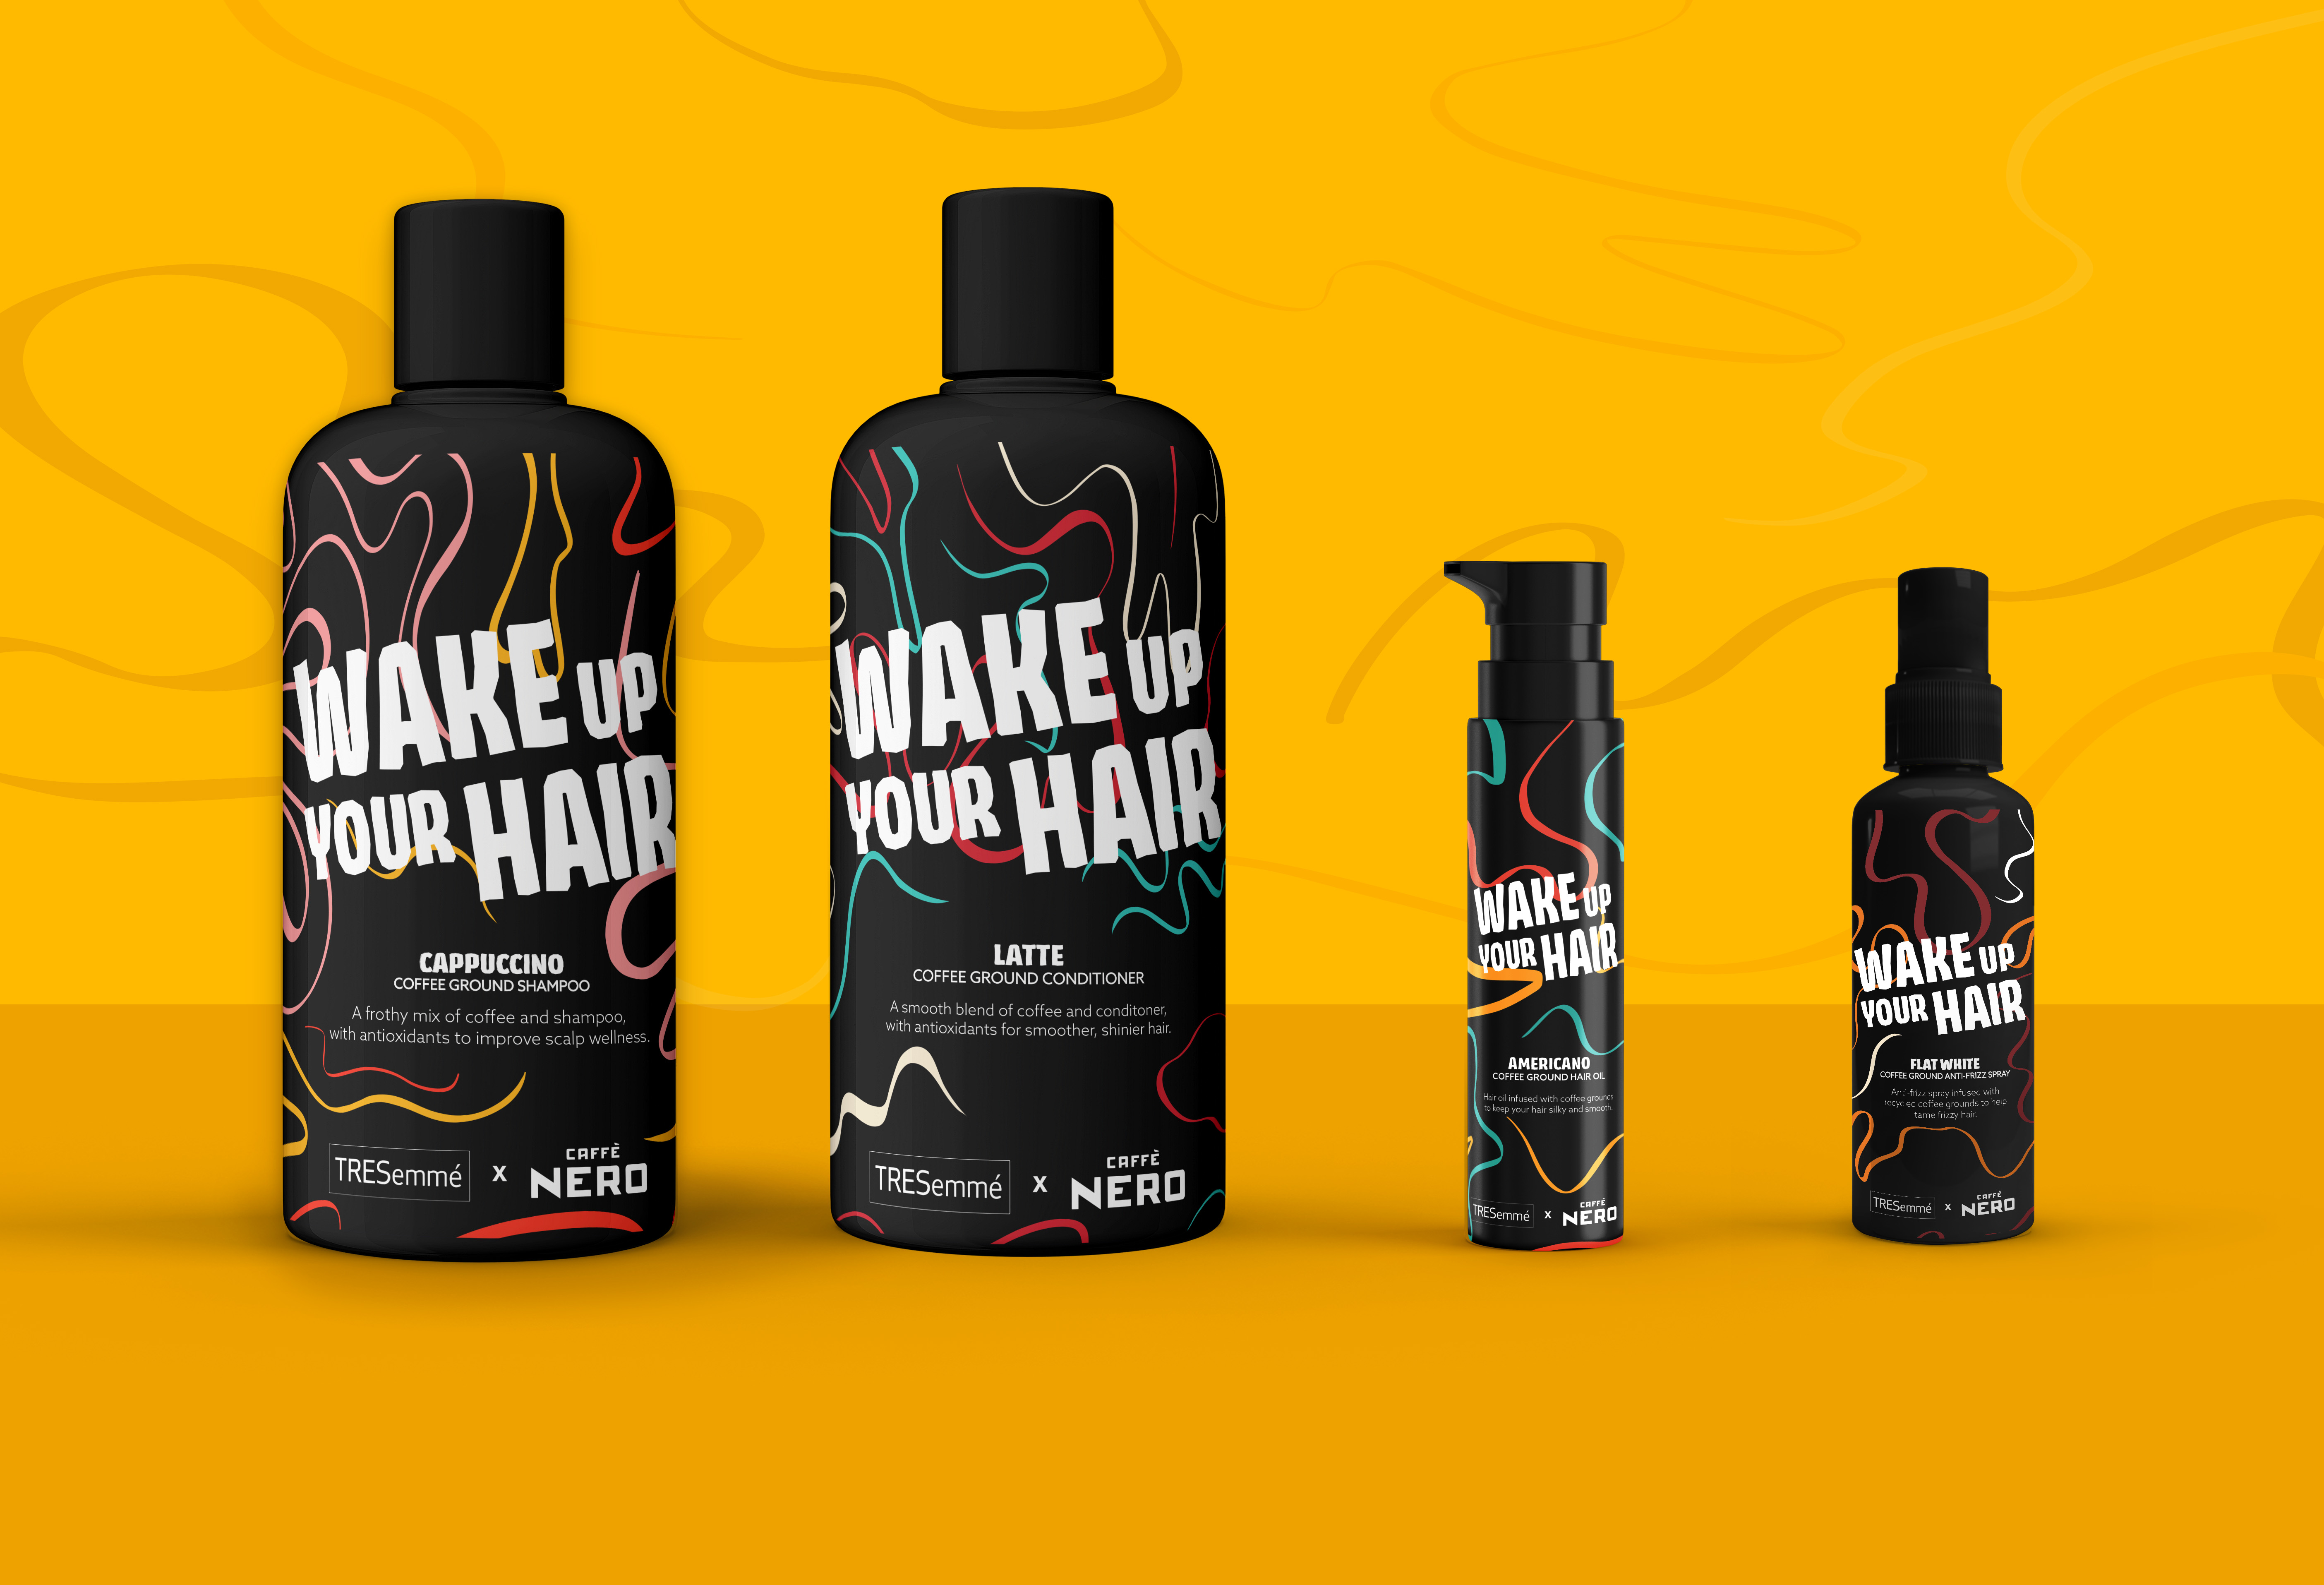 Graphic Design work by Lauren Kerr showing colourful hair packaging, black bottles with colourful wavy lines and product names in white over the top.